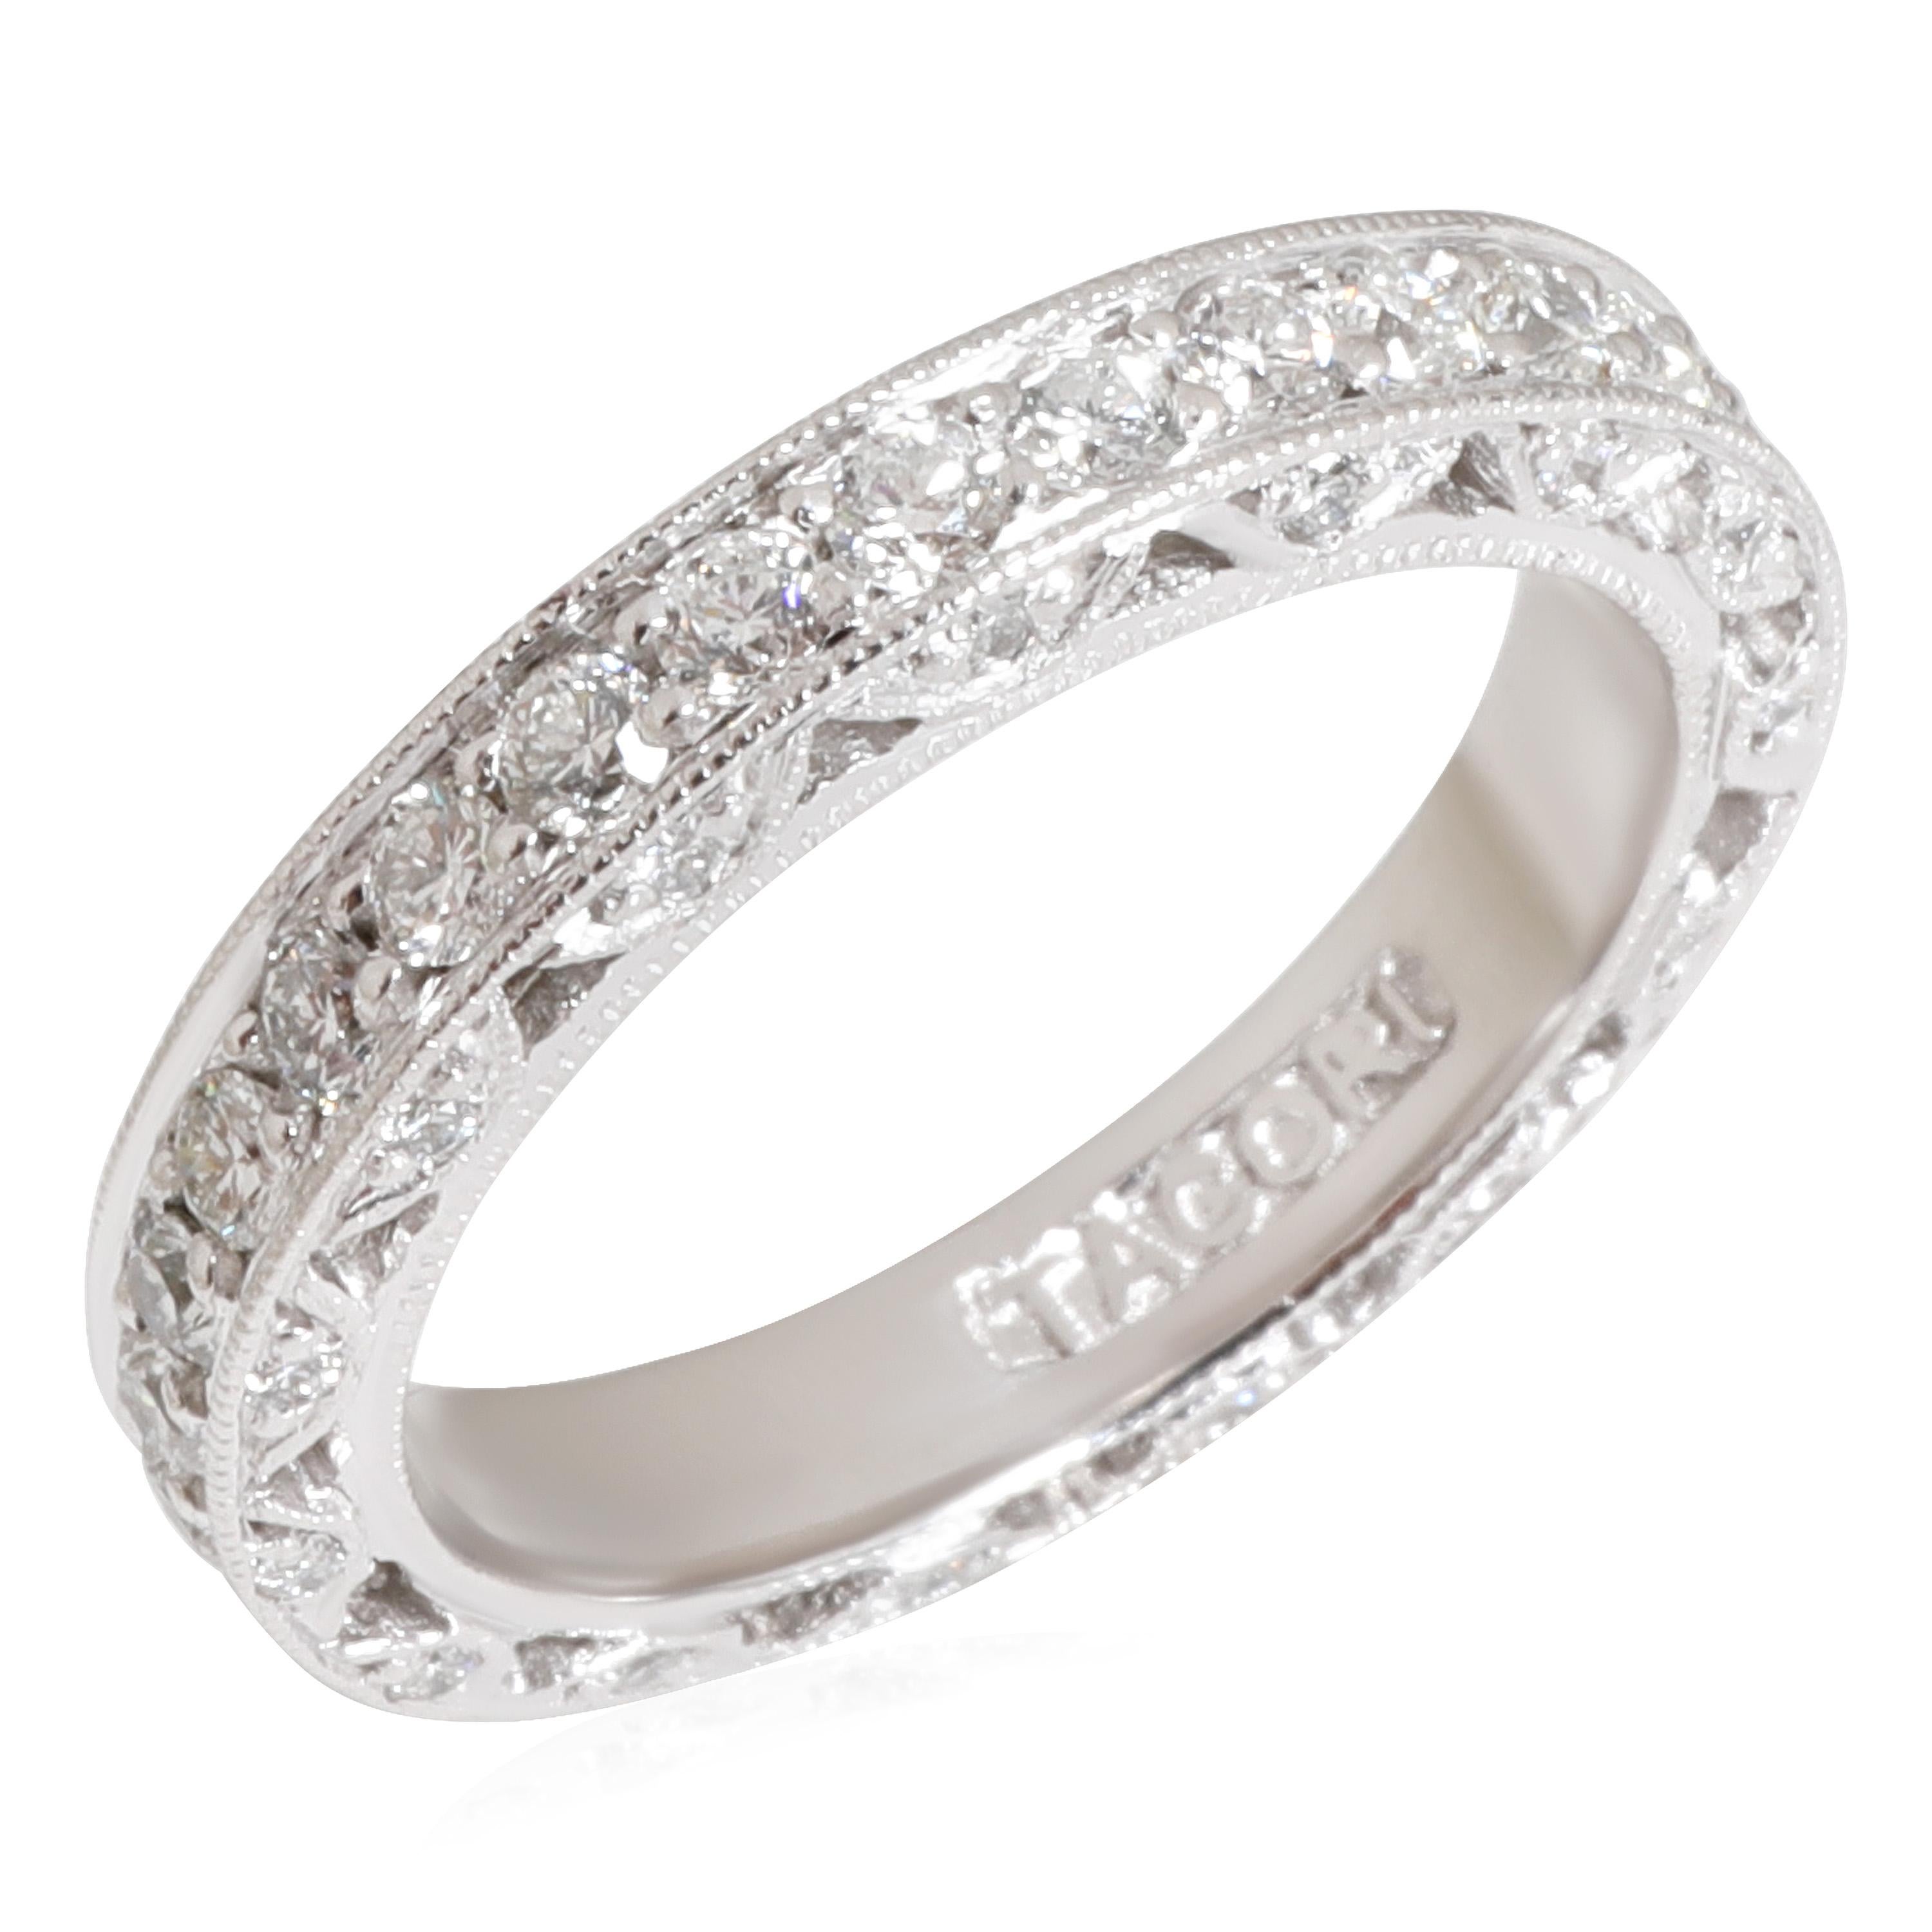 Tacori  Classic Crescent Diamond Wedding Band in Platinum

PRIMARY DETAILS
SKU: 116883
Listing Title: Tacori  Classic Crescent Diamond Wedding Band in Platinum
Condition Description: Retails for 8060 USD. In excellent condition and recently